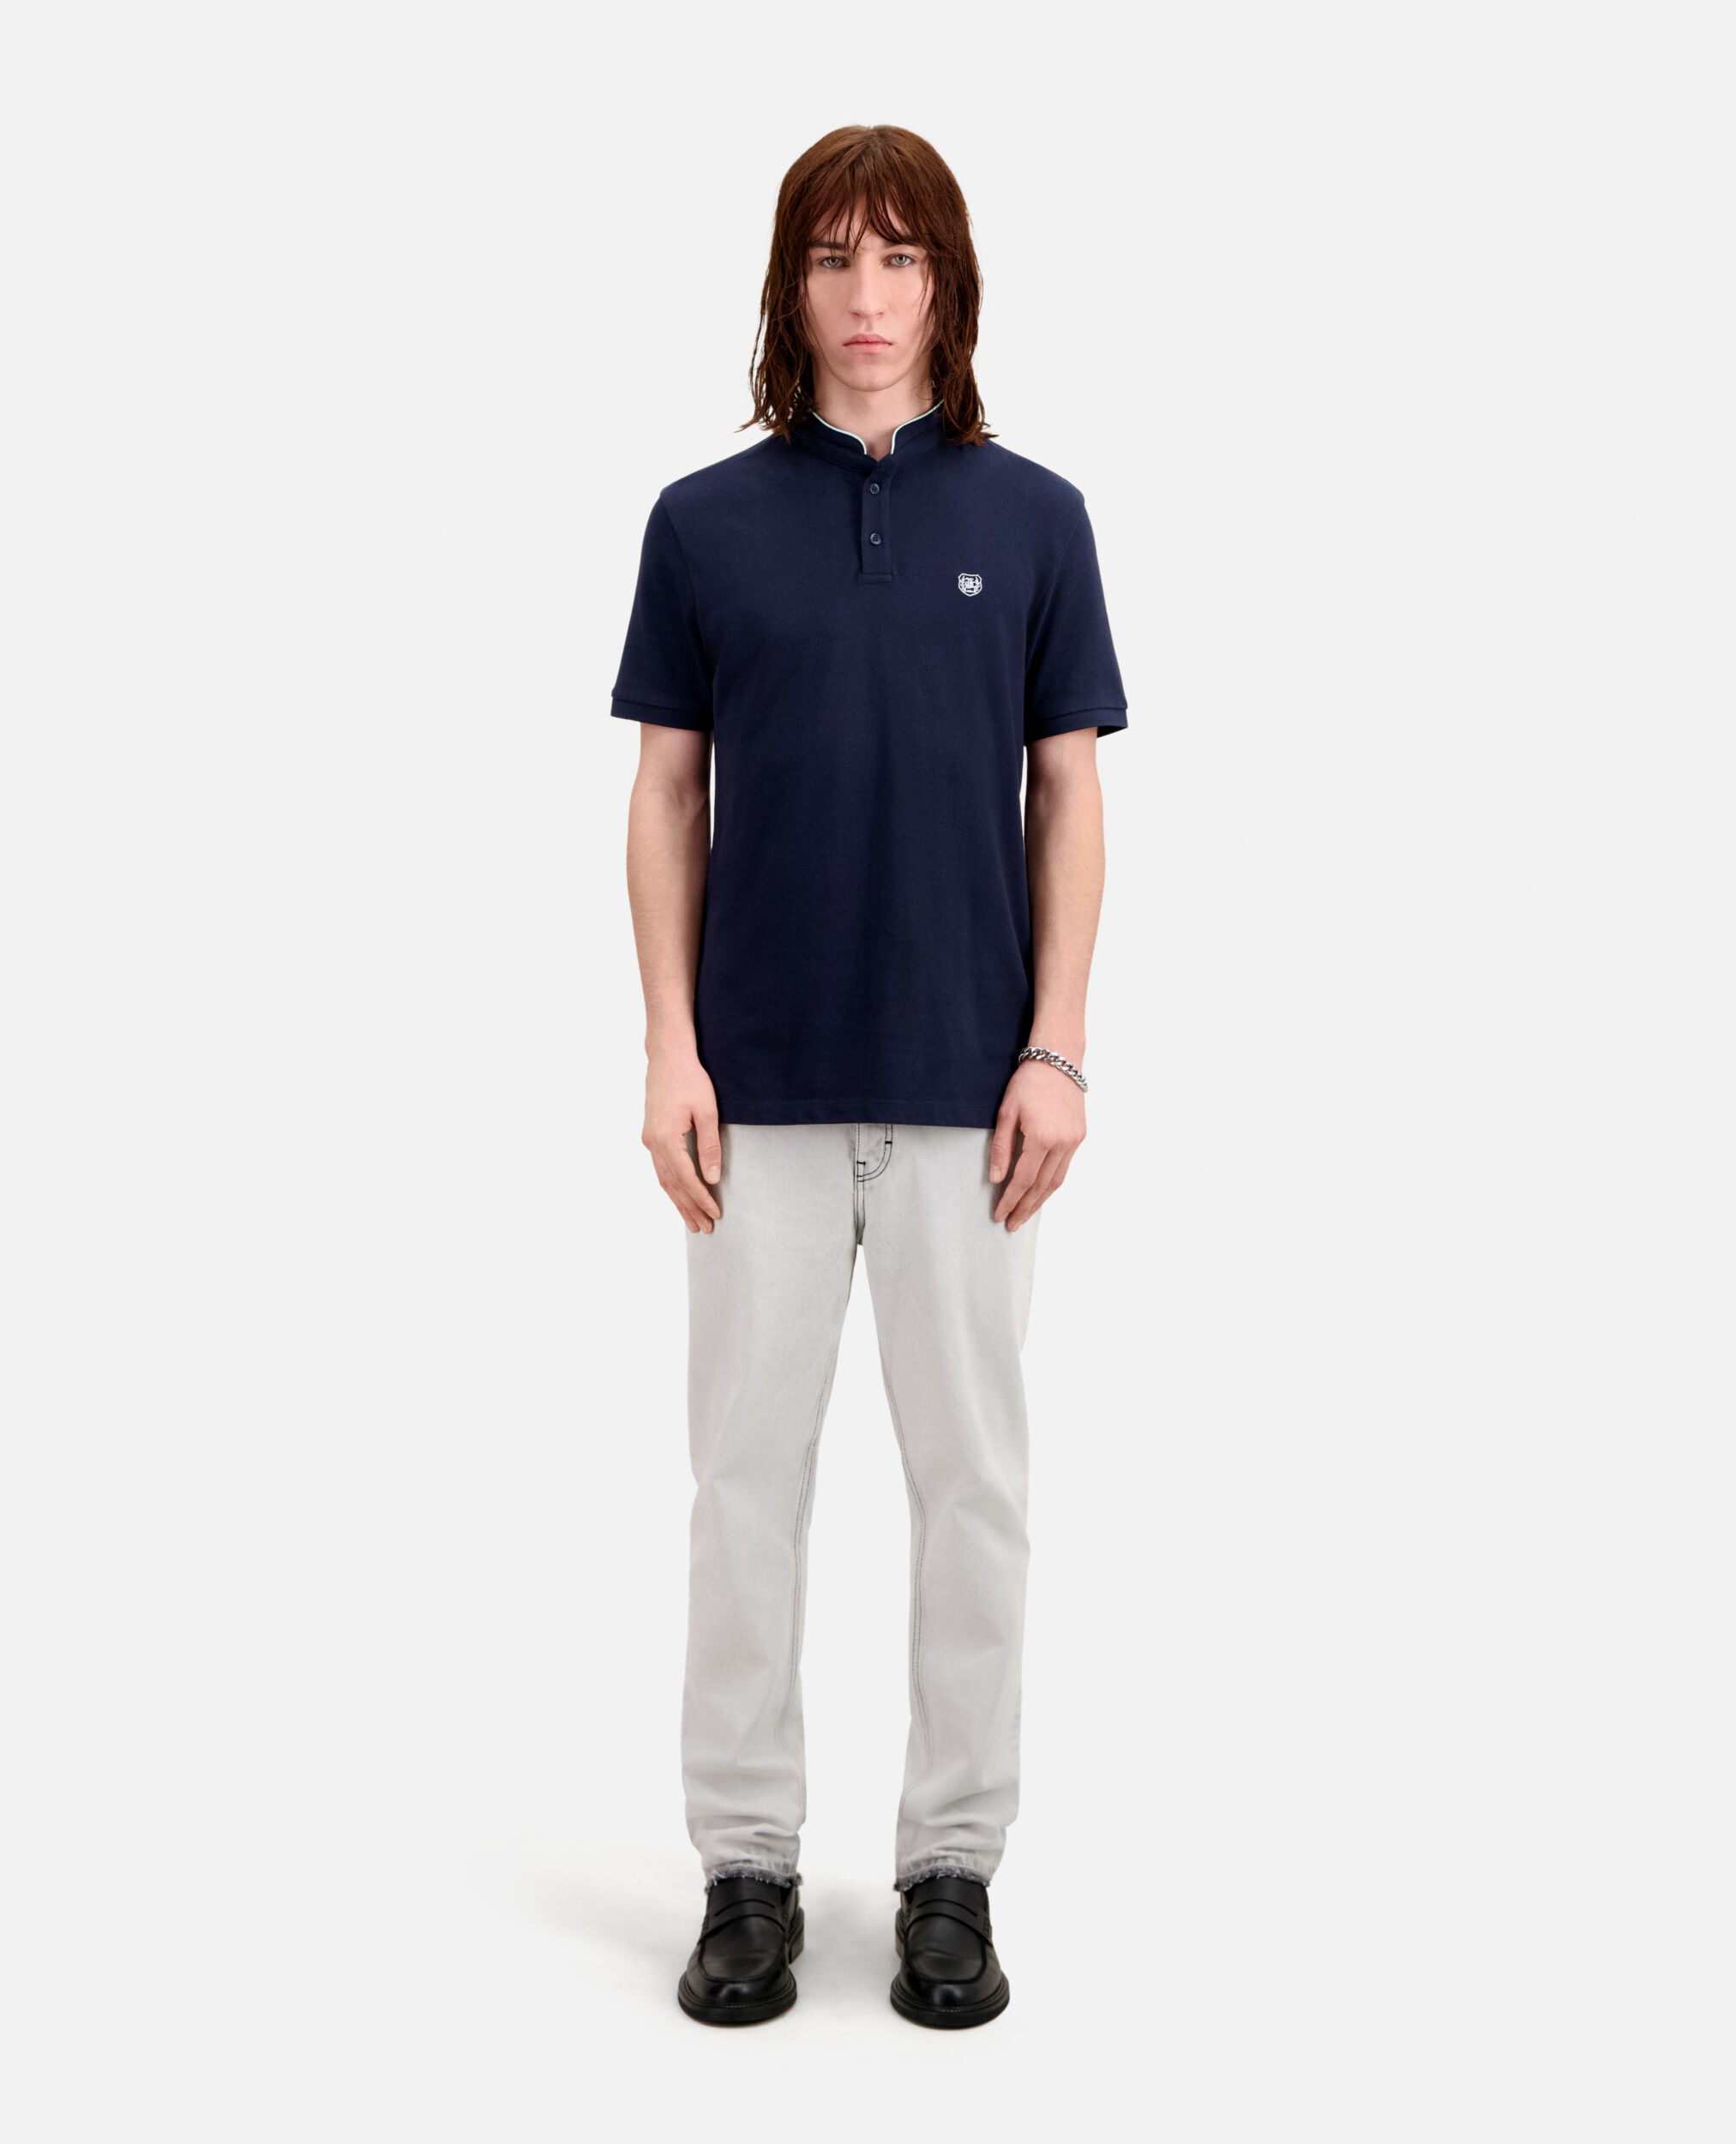 Navy blue cotton polo t-shirt, NAVY, hi-res image number null